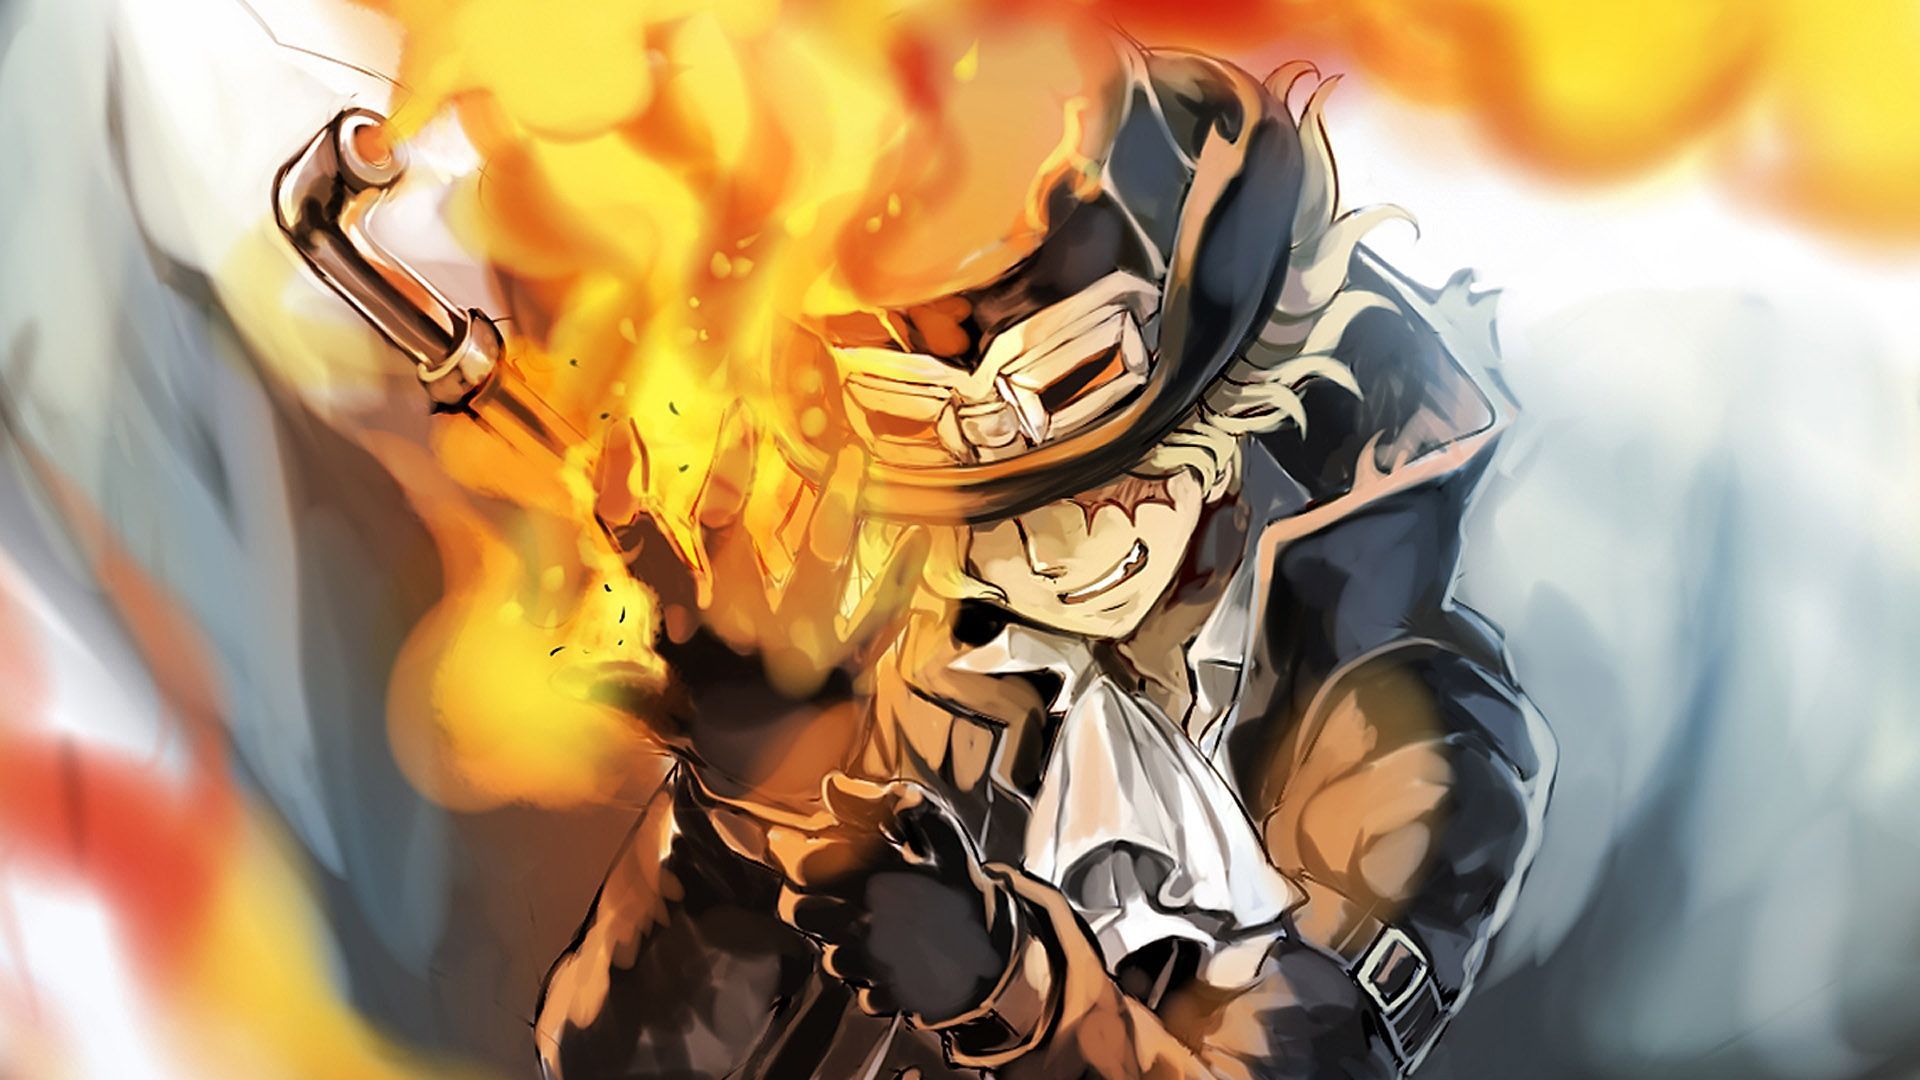 Desktop Wallpaper Sabo Anime One Piece Hd Image Picture Background Eb8a10